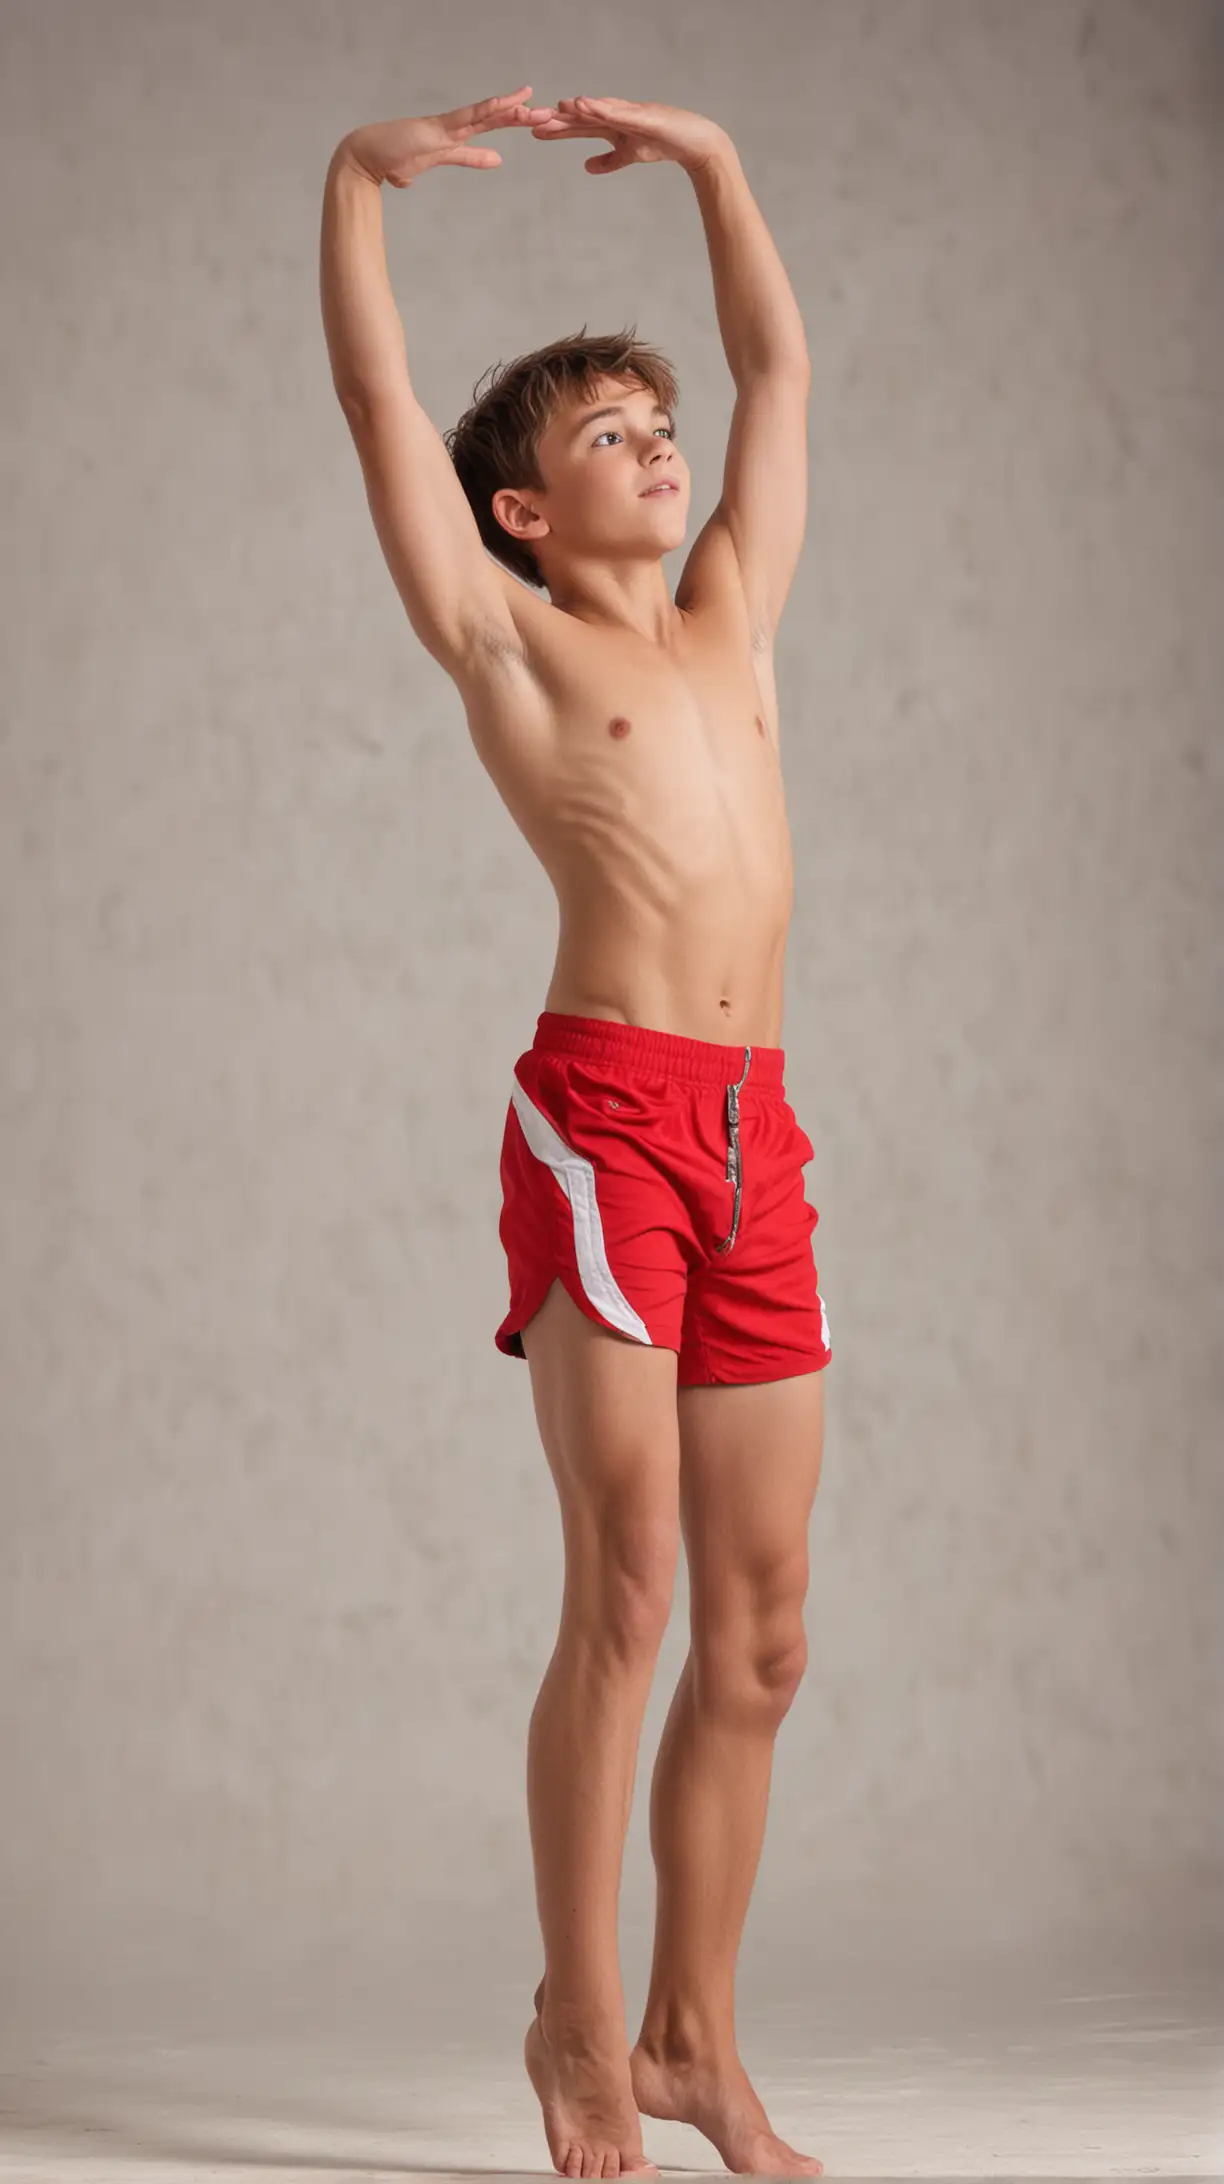 Teen Male Gymnast Performing Star Jump Exercise Barefoot